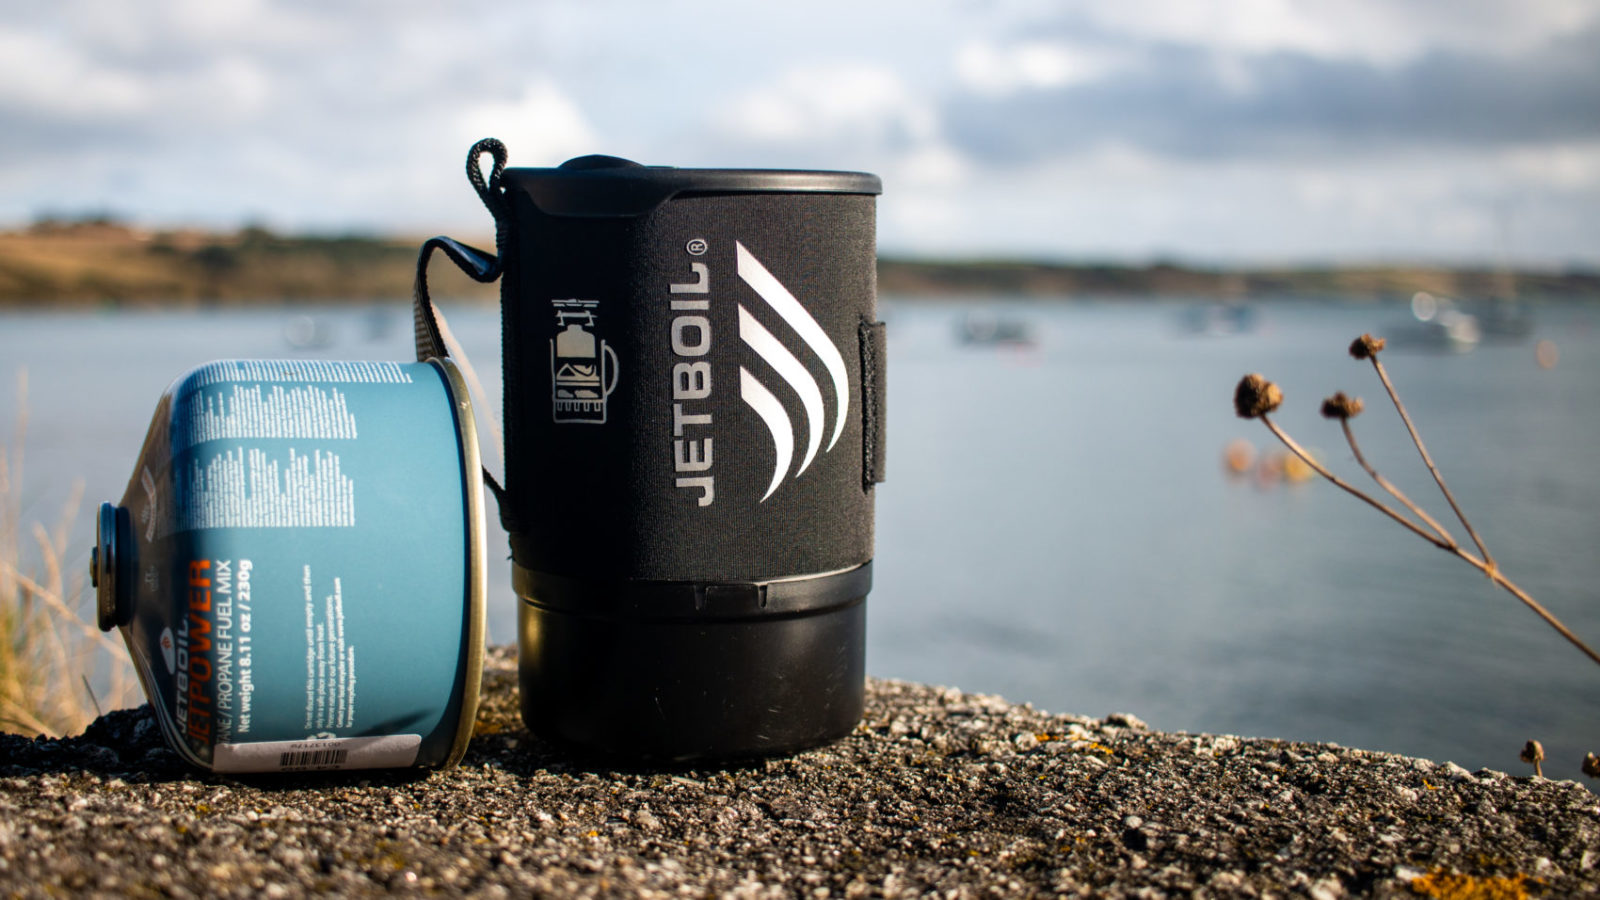 Jetboil Zip The Portable, Compact Camping Stove 